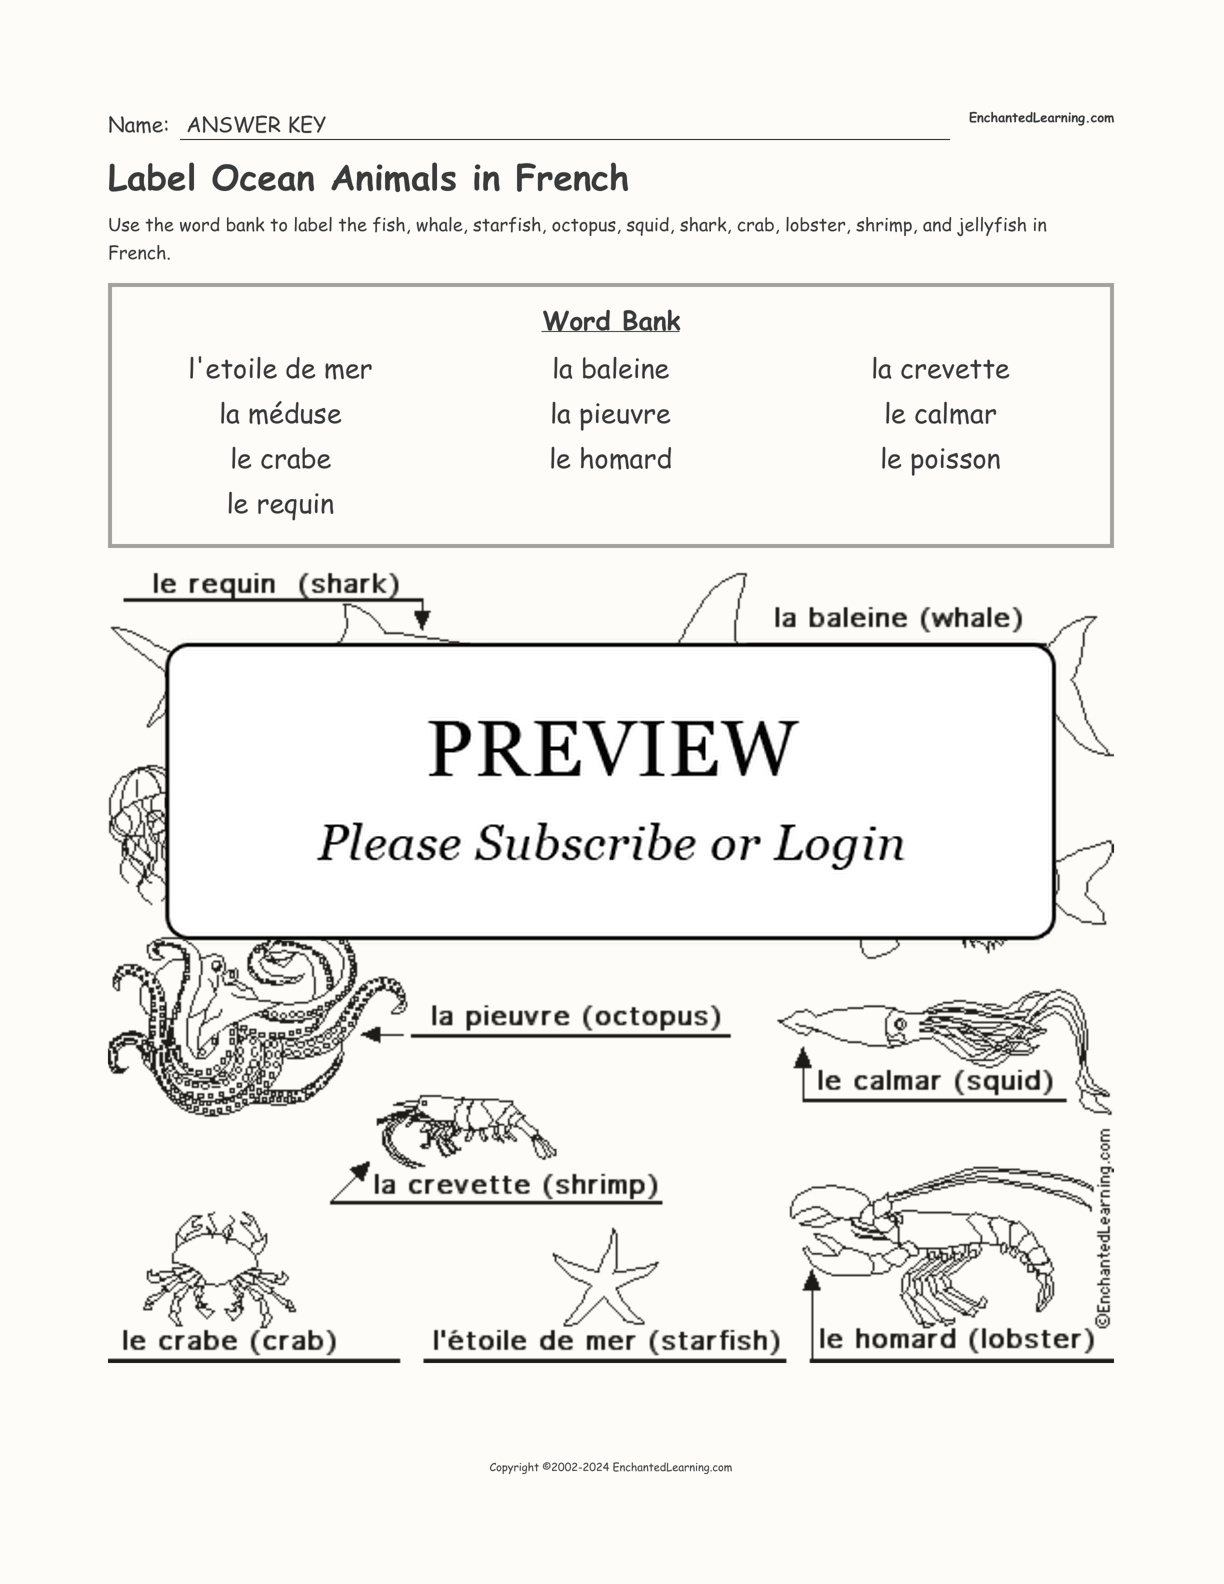 Label Ocean Animals in French interactive worksheet page 2